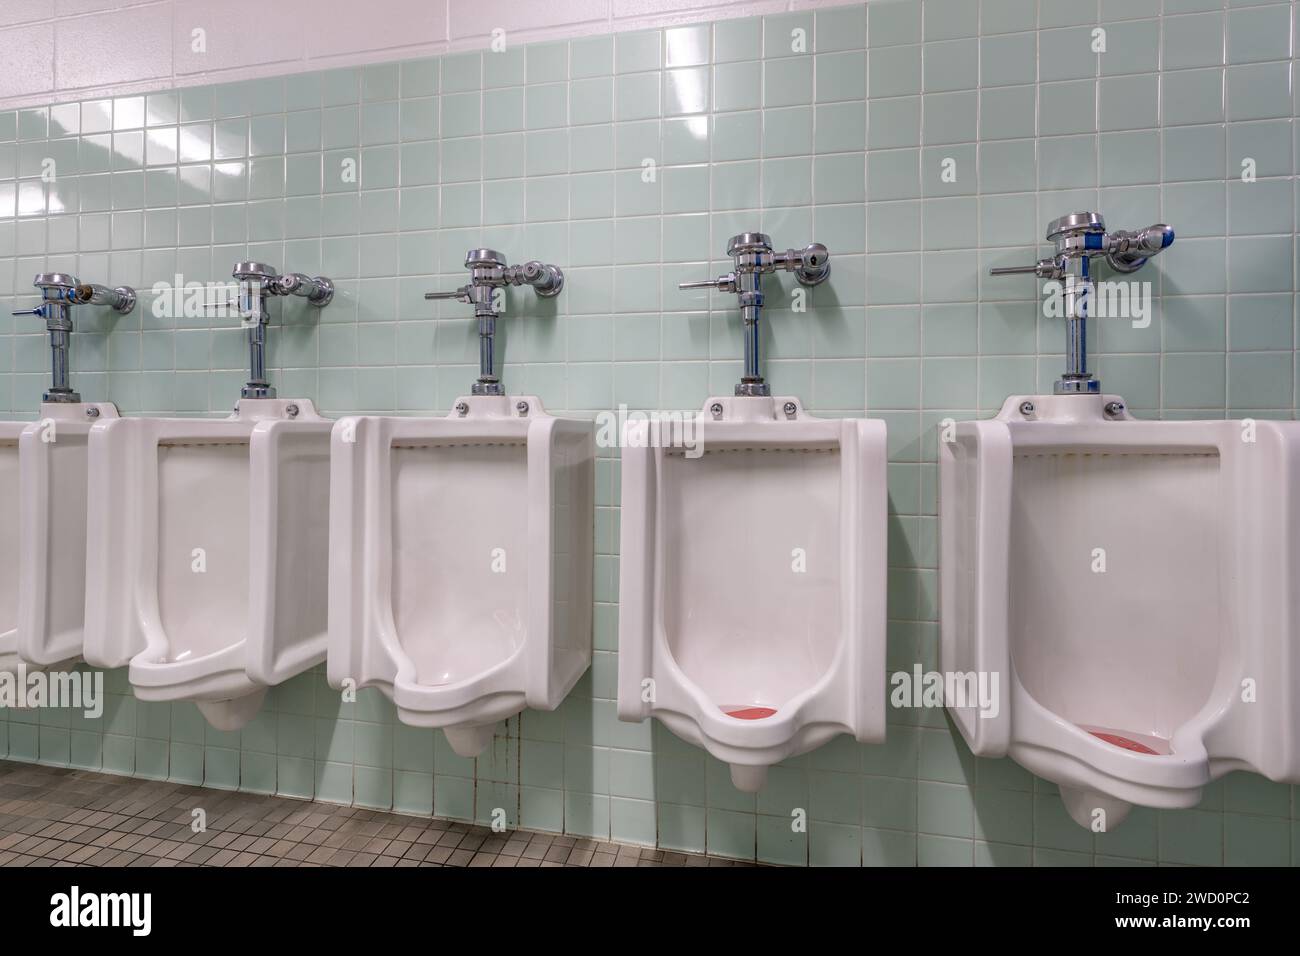 Row of multiple white porcelain ceramic urinals in an older men's bathroom with green tile. Stock Photo